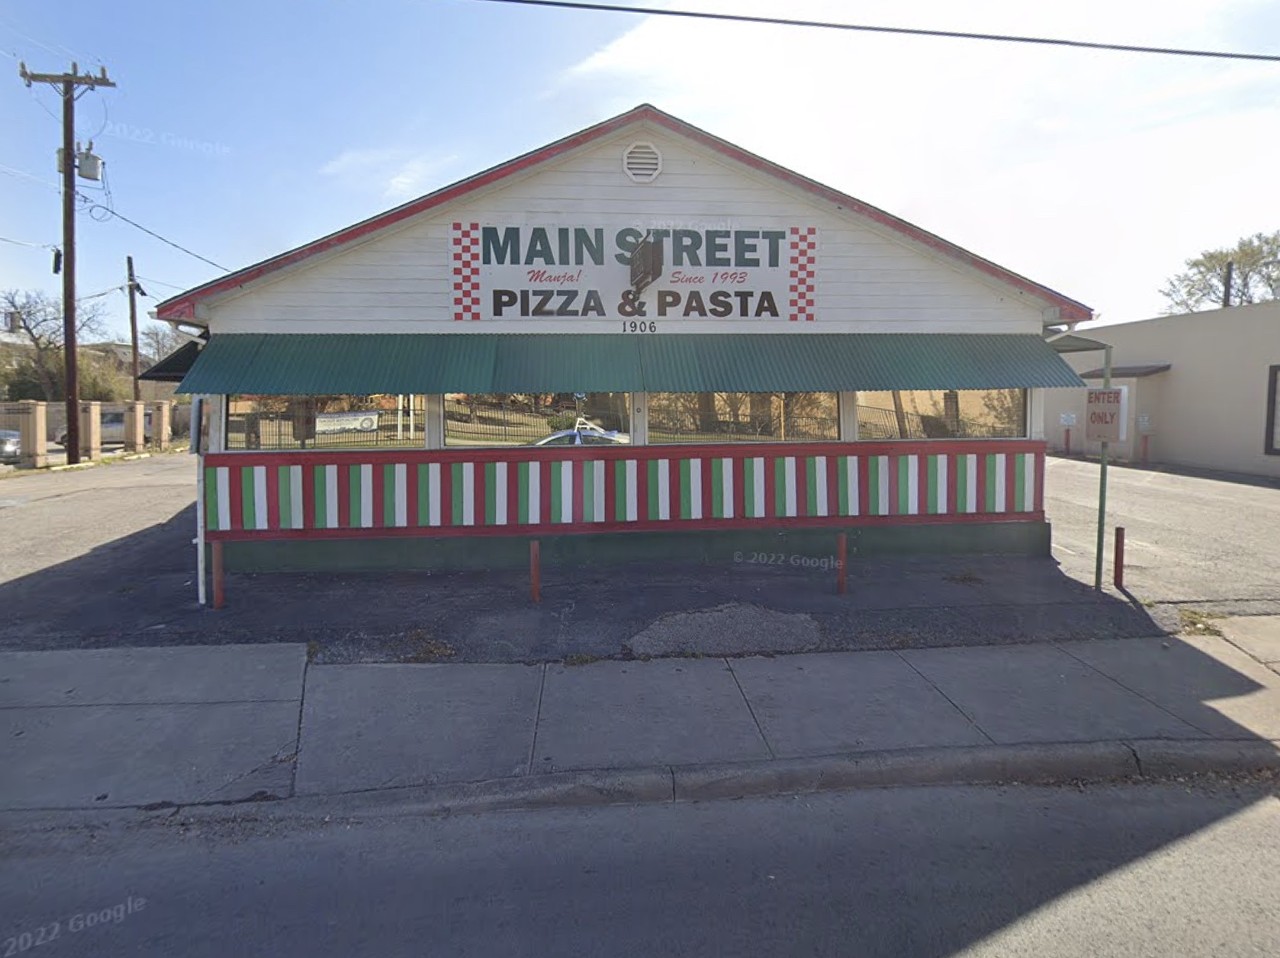 Main Street Pizza
1906 N. Main Ave., (210) 732-8861, mainstreetsa.com
With sizes from personal to extra large, a wide spectrum of toppings, and a Sicilian option, Main Street Pizza has all bases covered for a classic pie.